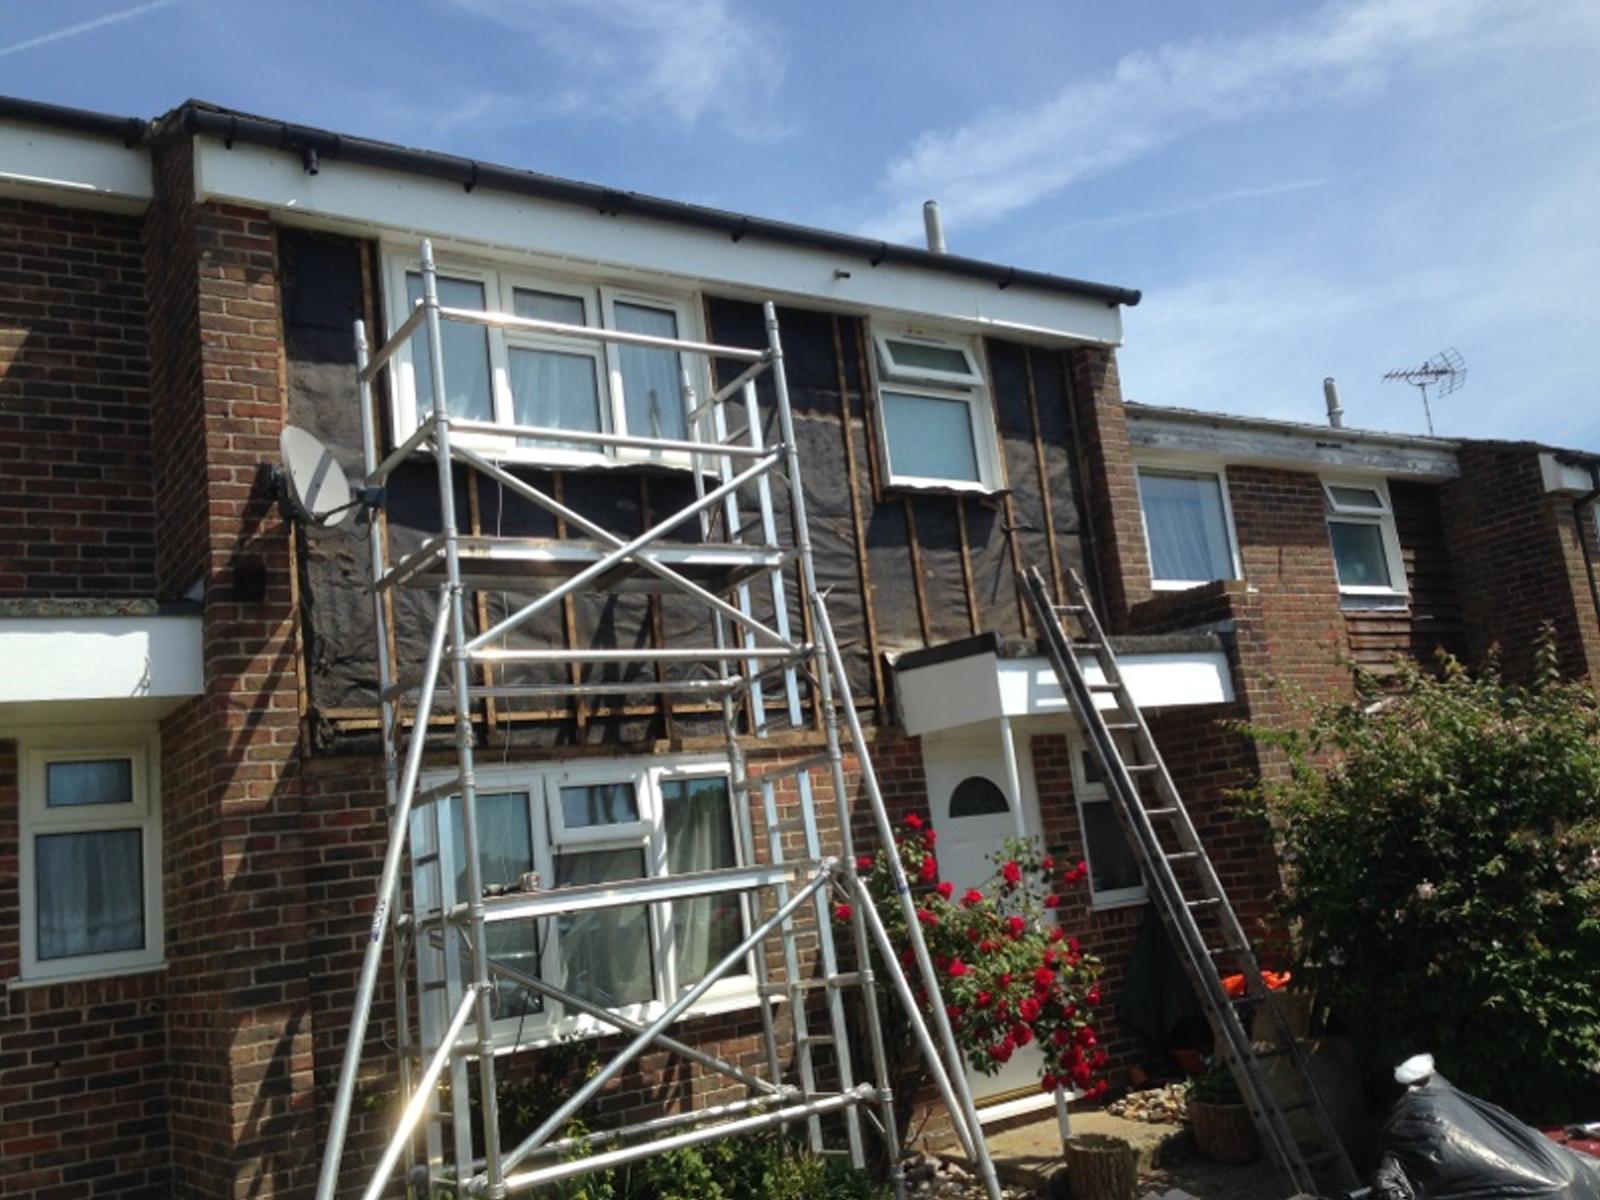 Planned Decorating, scaffolding image on house